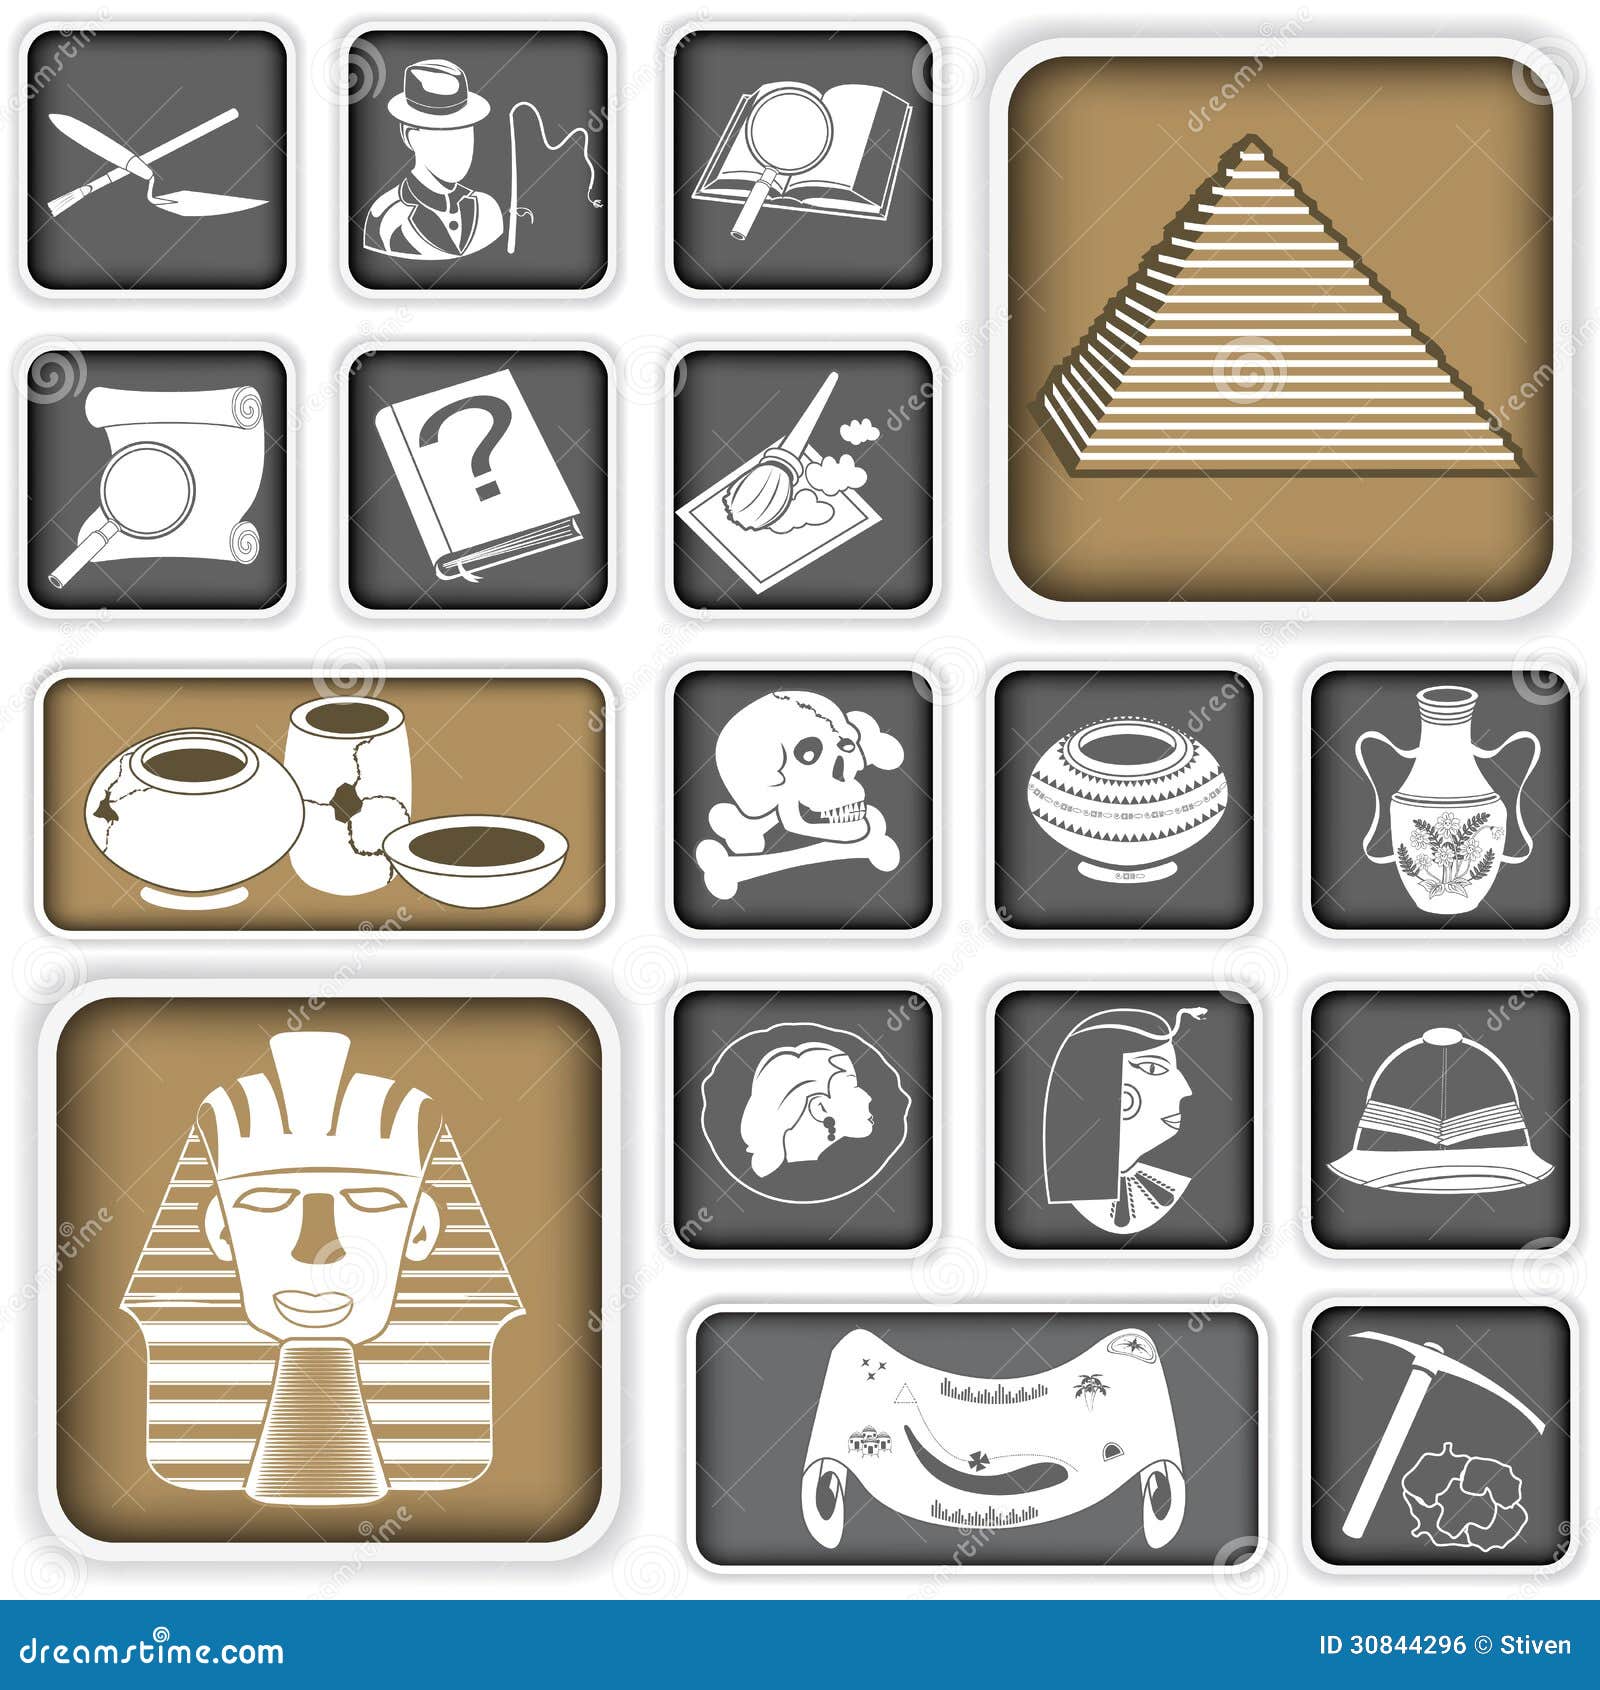 archeology squared icons